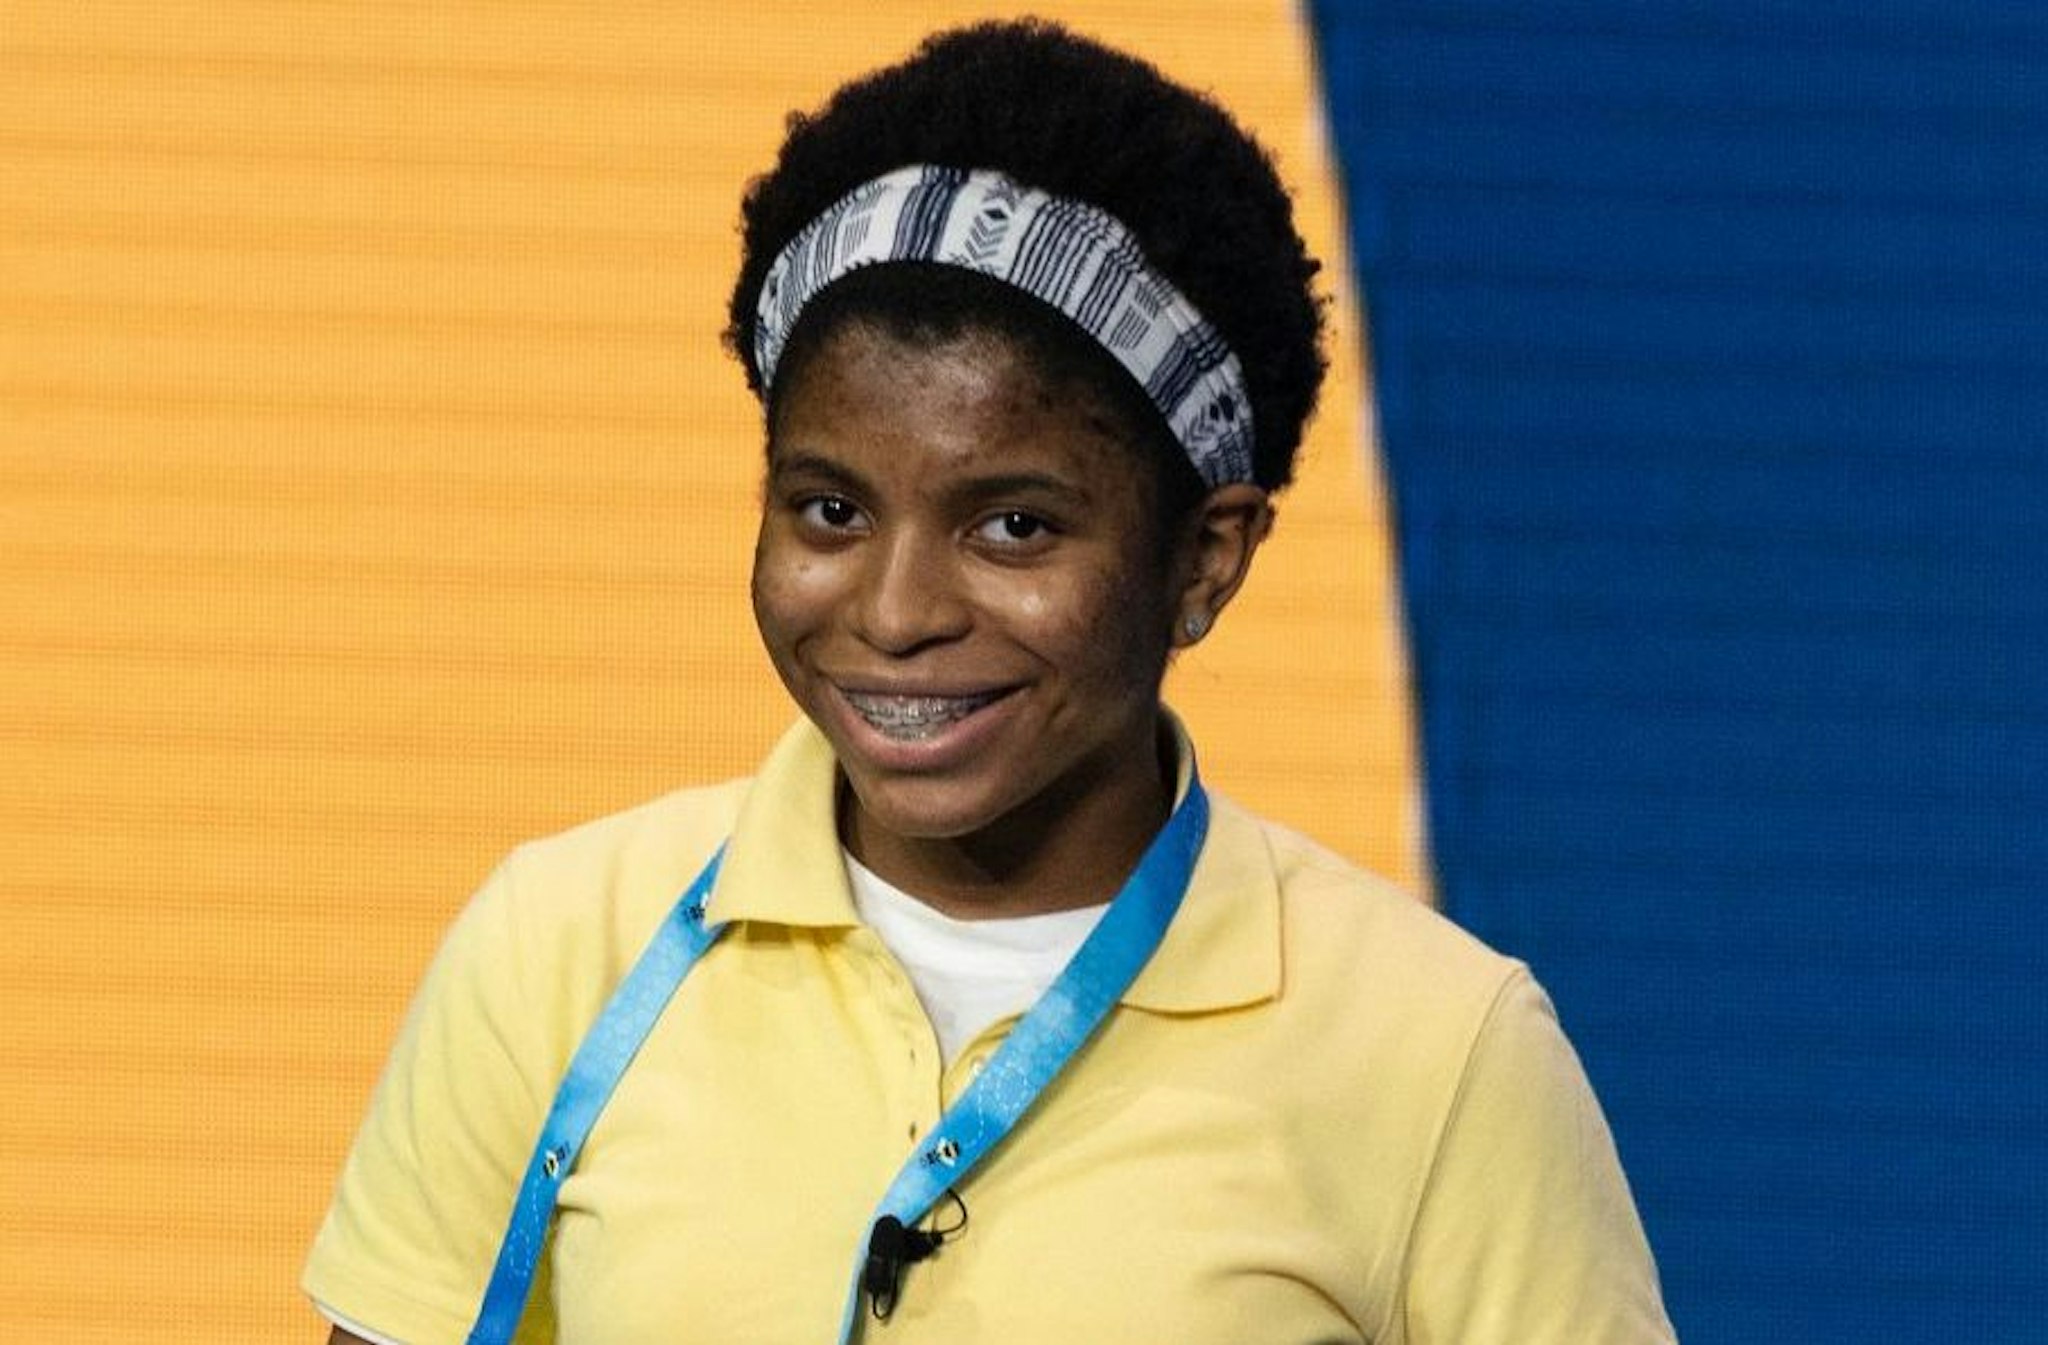 Zaila Avant-garde competes in the first round of the the Scripps National Spelling Bee finals in Orlando, Florida on July 8, 2021.